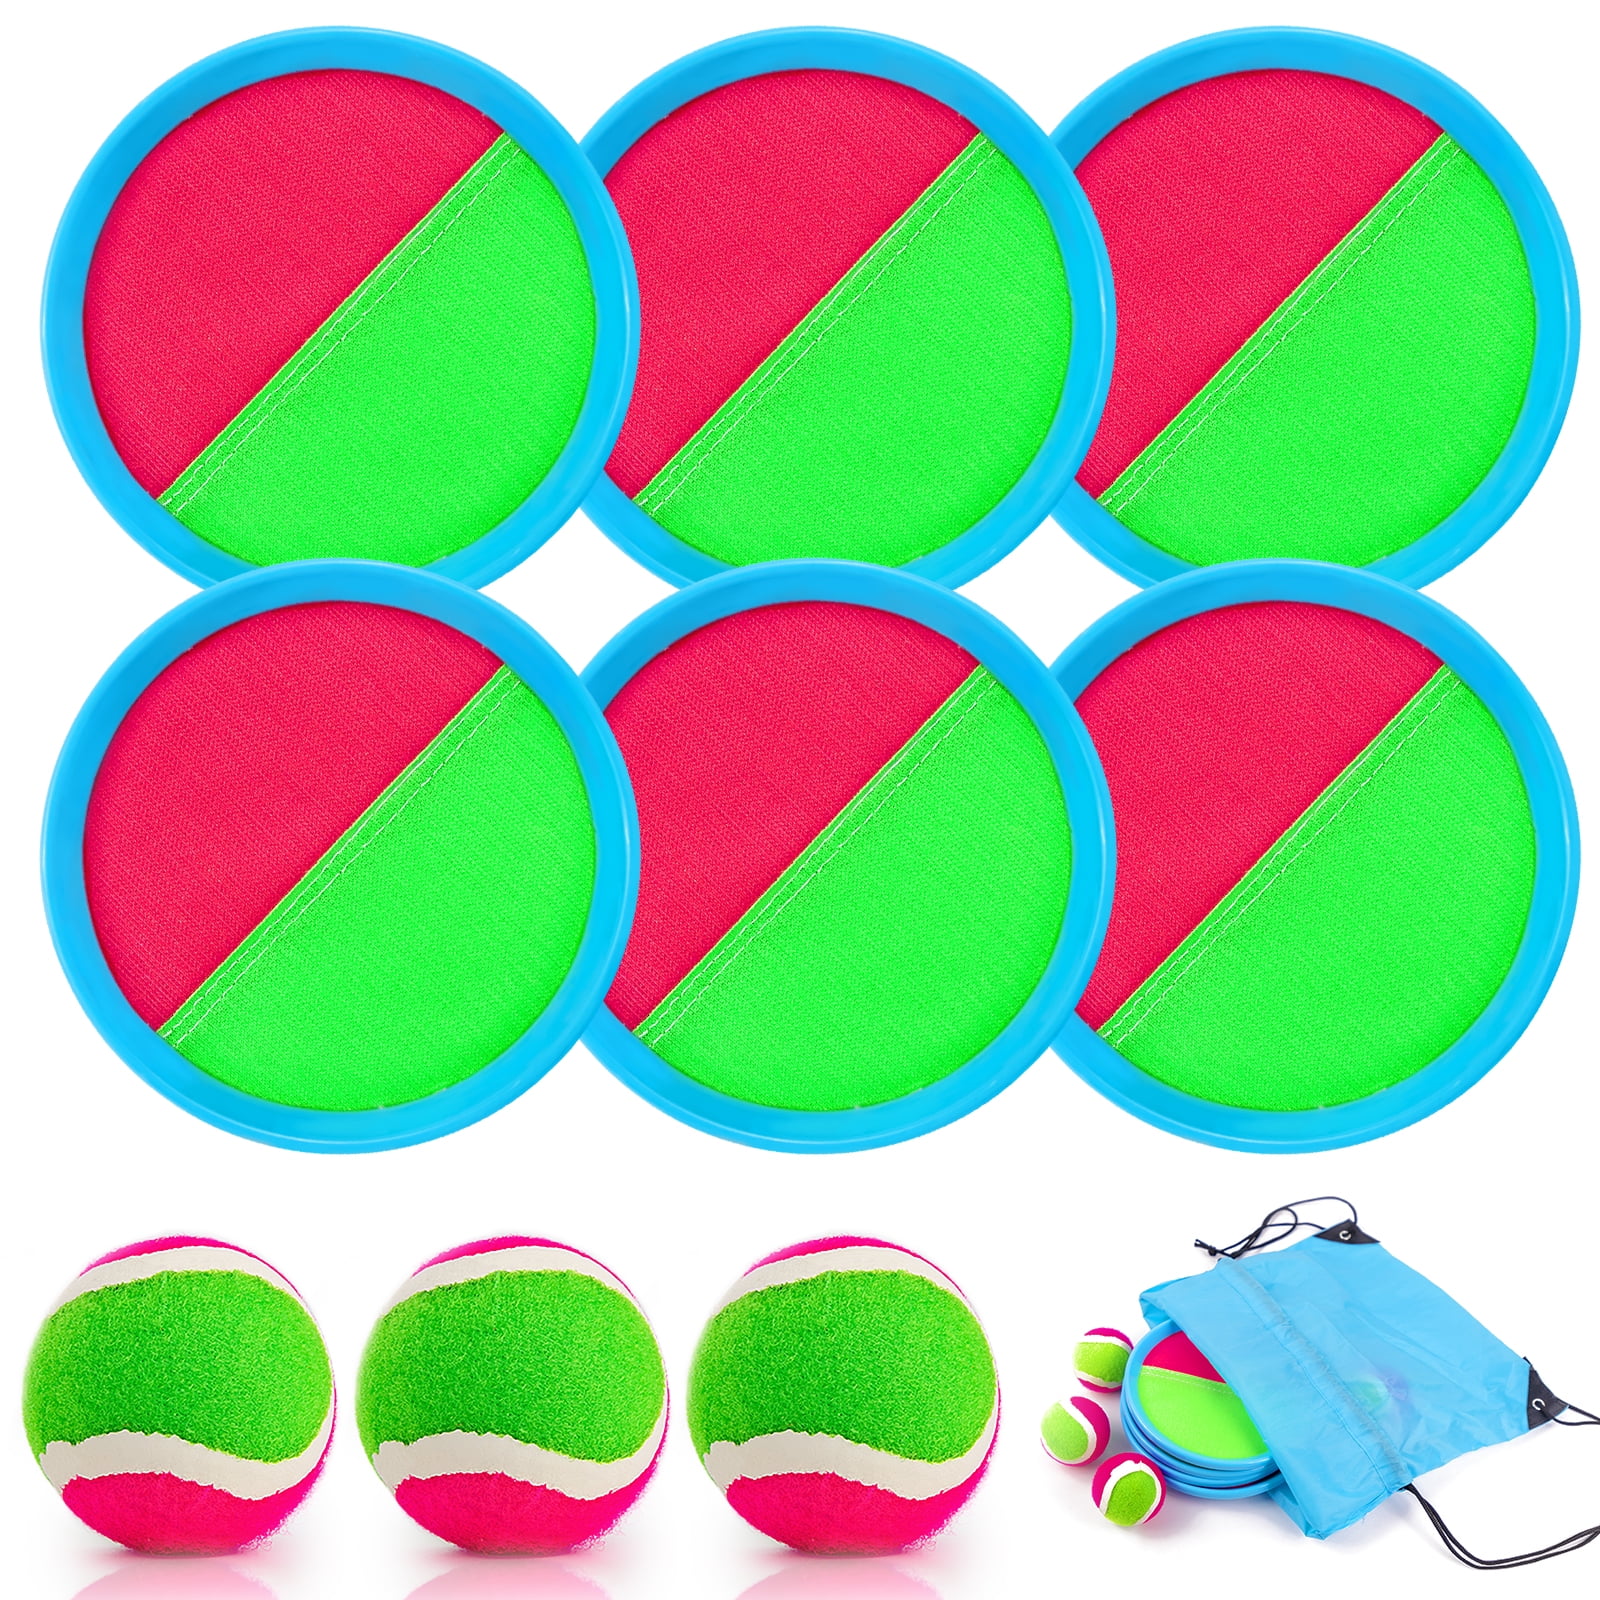 Ayeboovi Toss and Catch Game with 4 Paddles and 4 Balls Outdoor Games for  Kids Yard Games Beach Toys Outside Games for 3 4 5 6 7 8 9 10 Year Old Boys  Girls (Upgraded) 